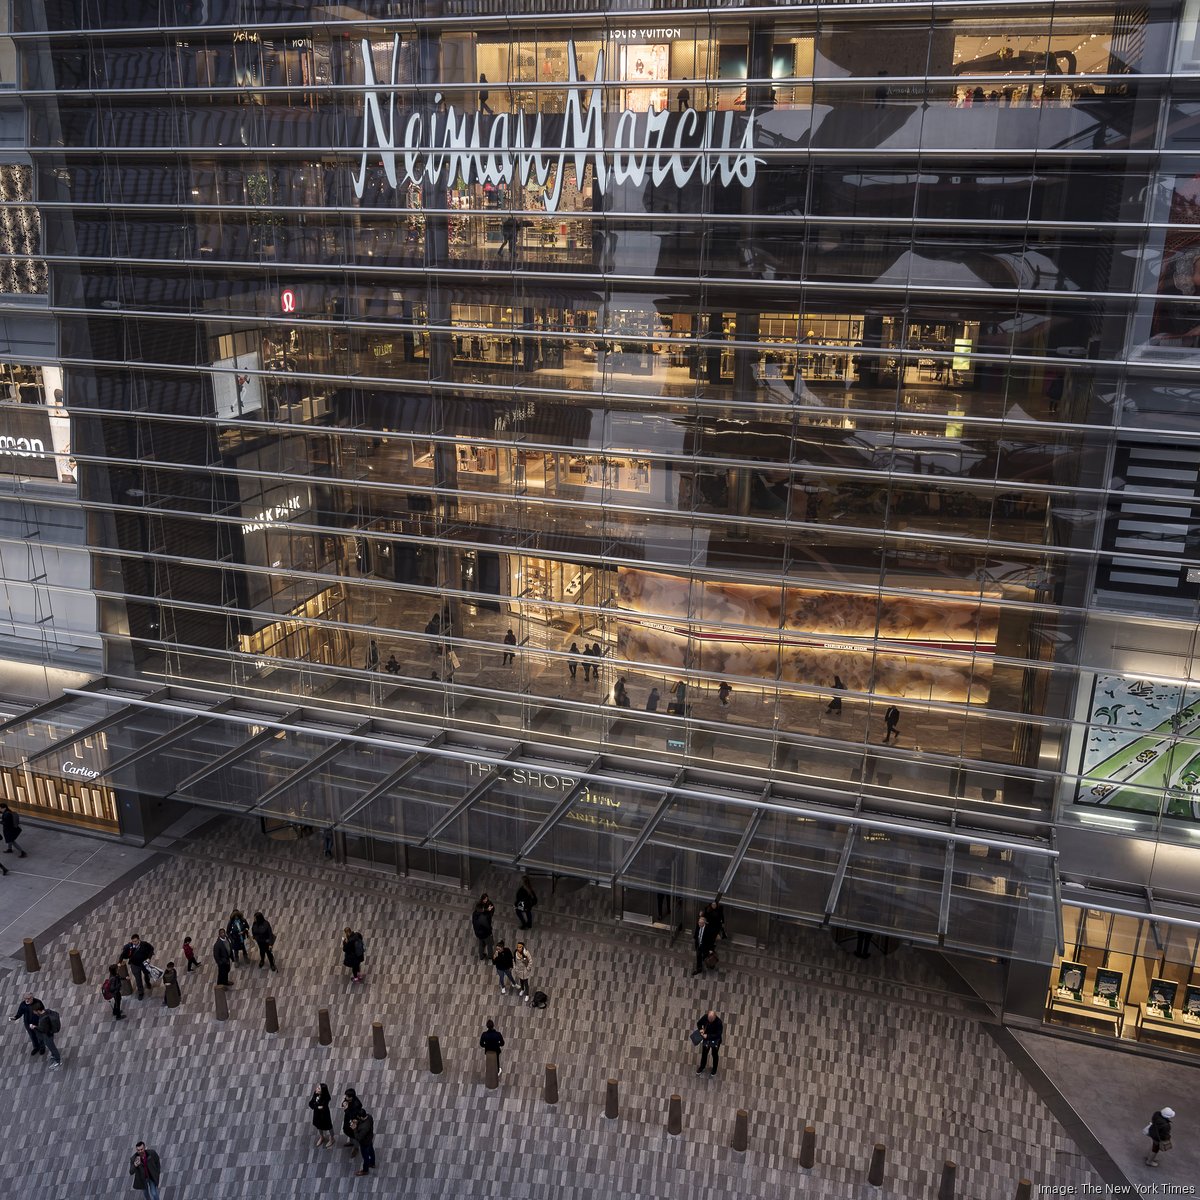 Louis Vuitton Hudson Yards Store in New York, United States